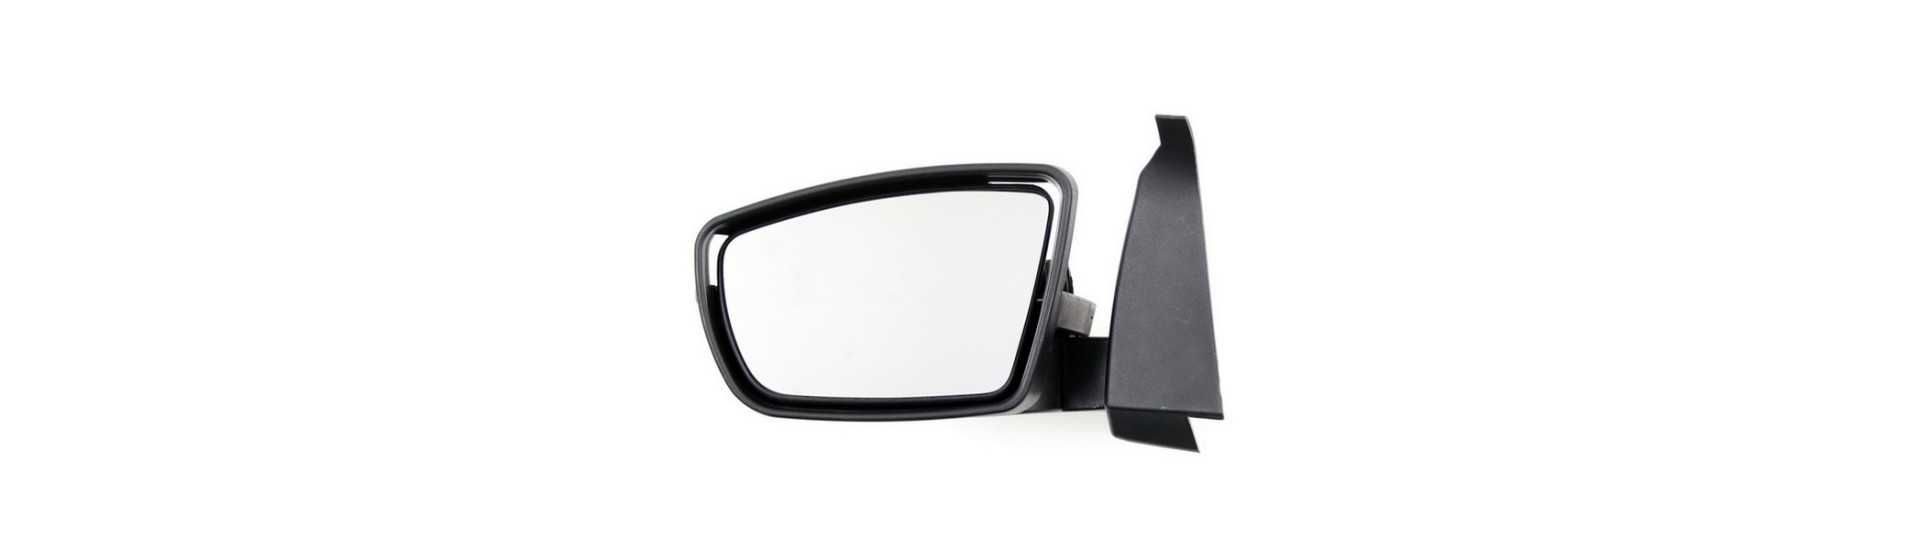 Car rearview mirror and mirror without a permit